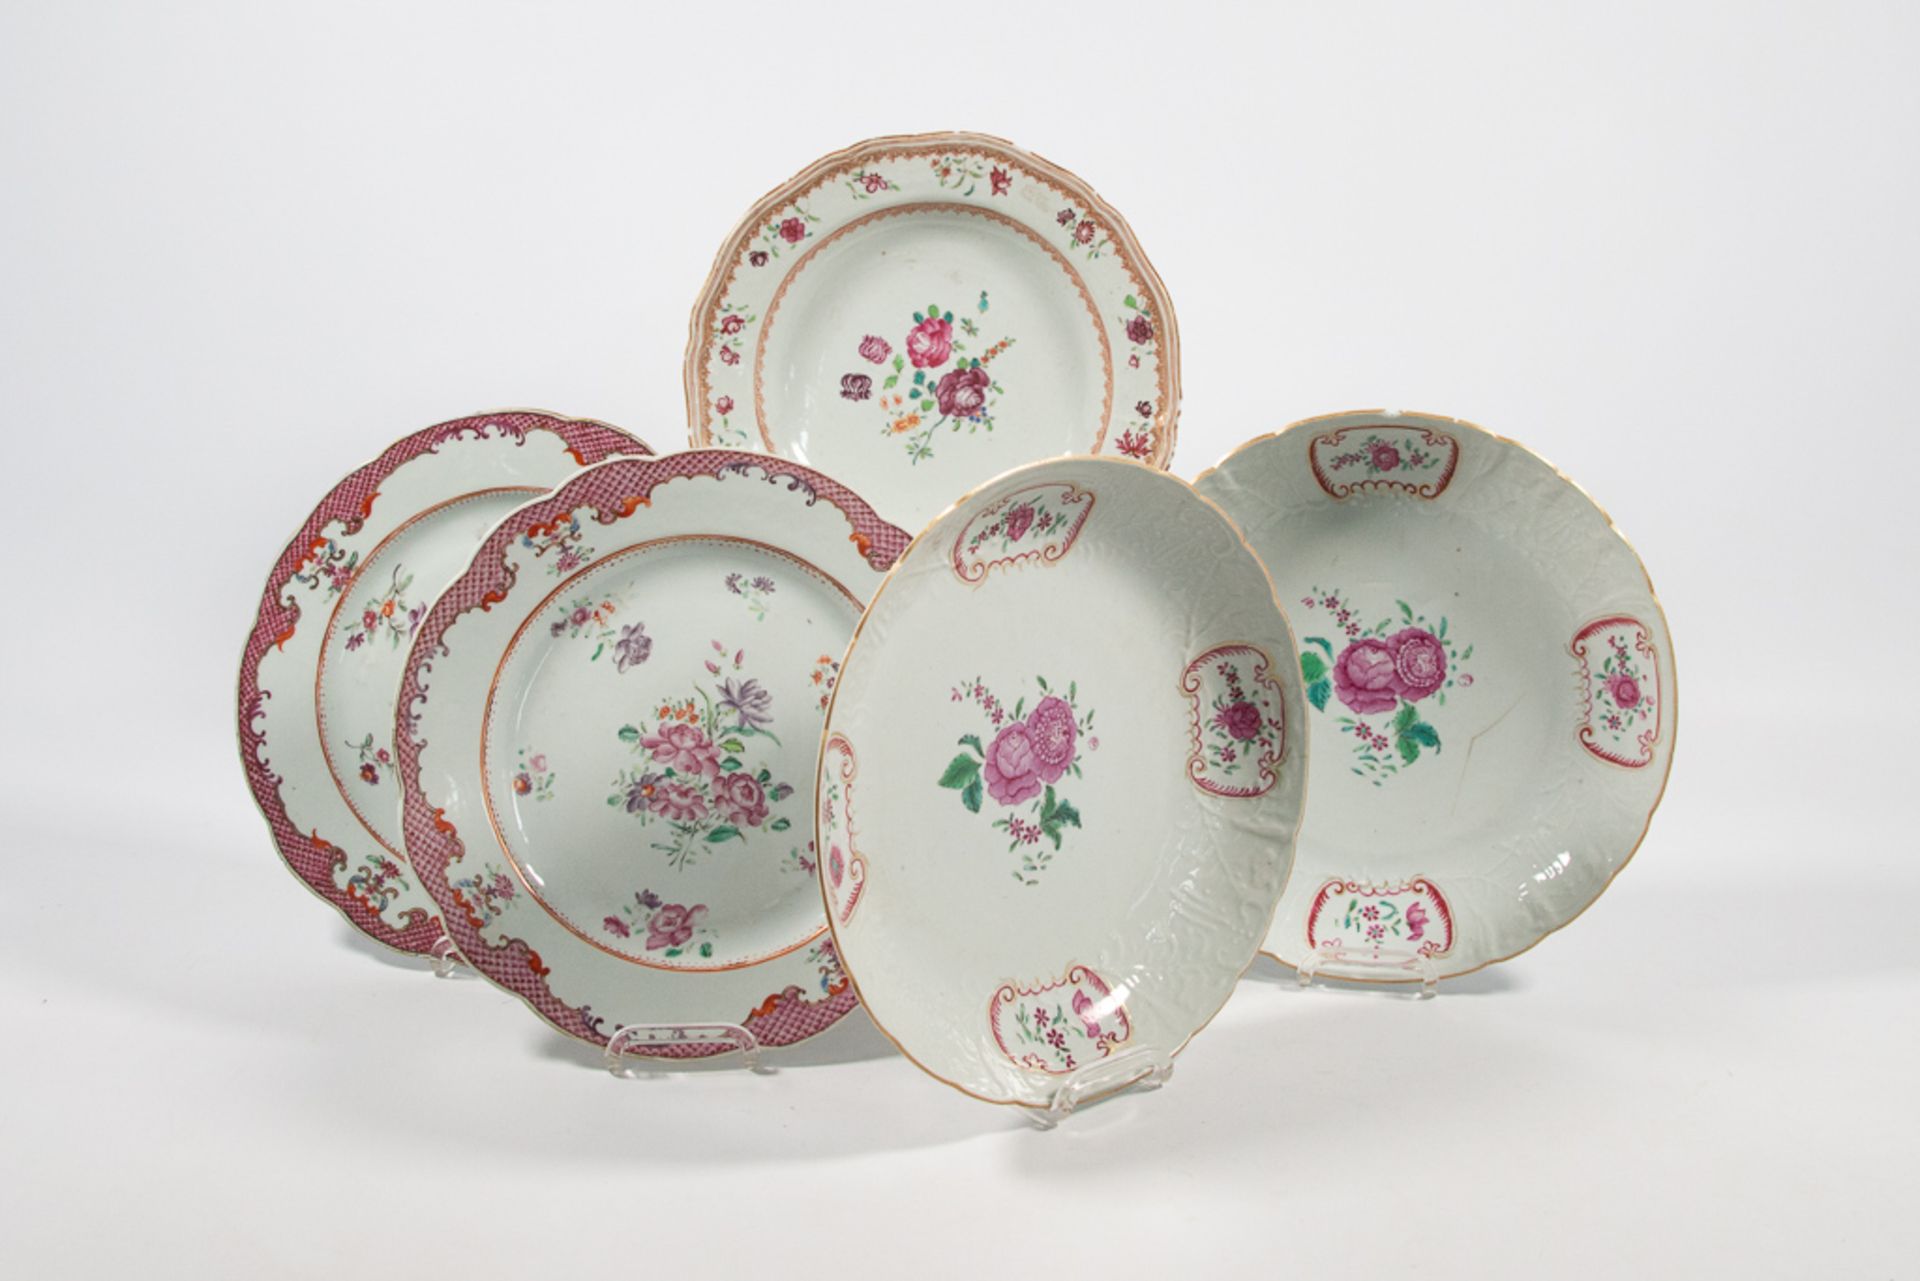 Collection of 5 Famille rose plates - Image 18 of 33